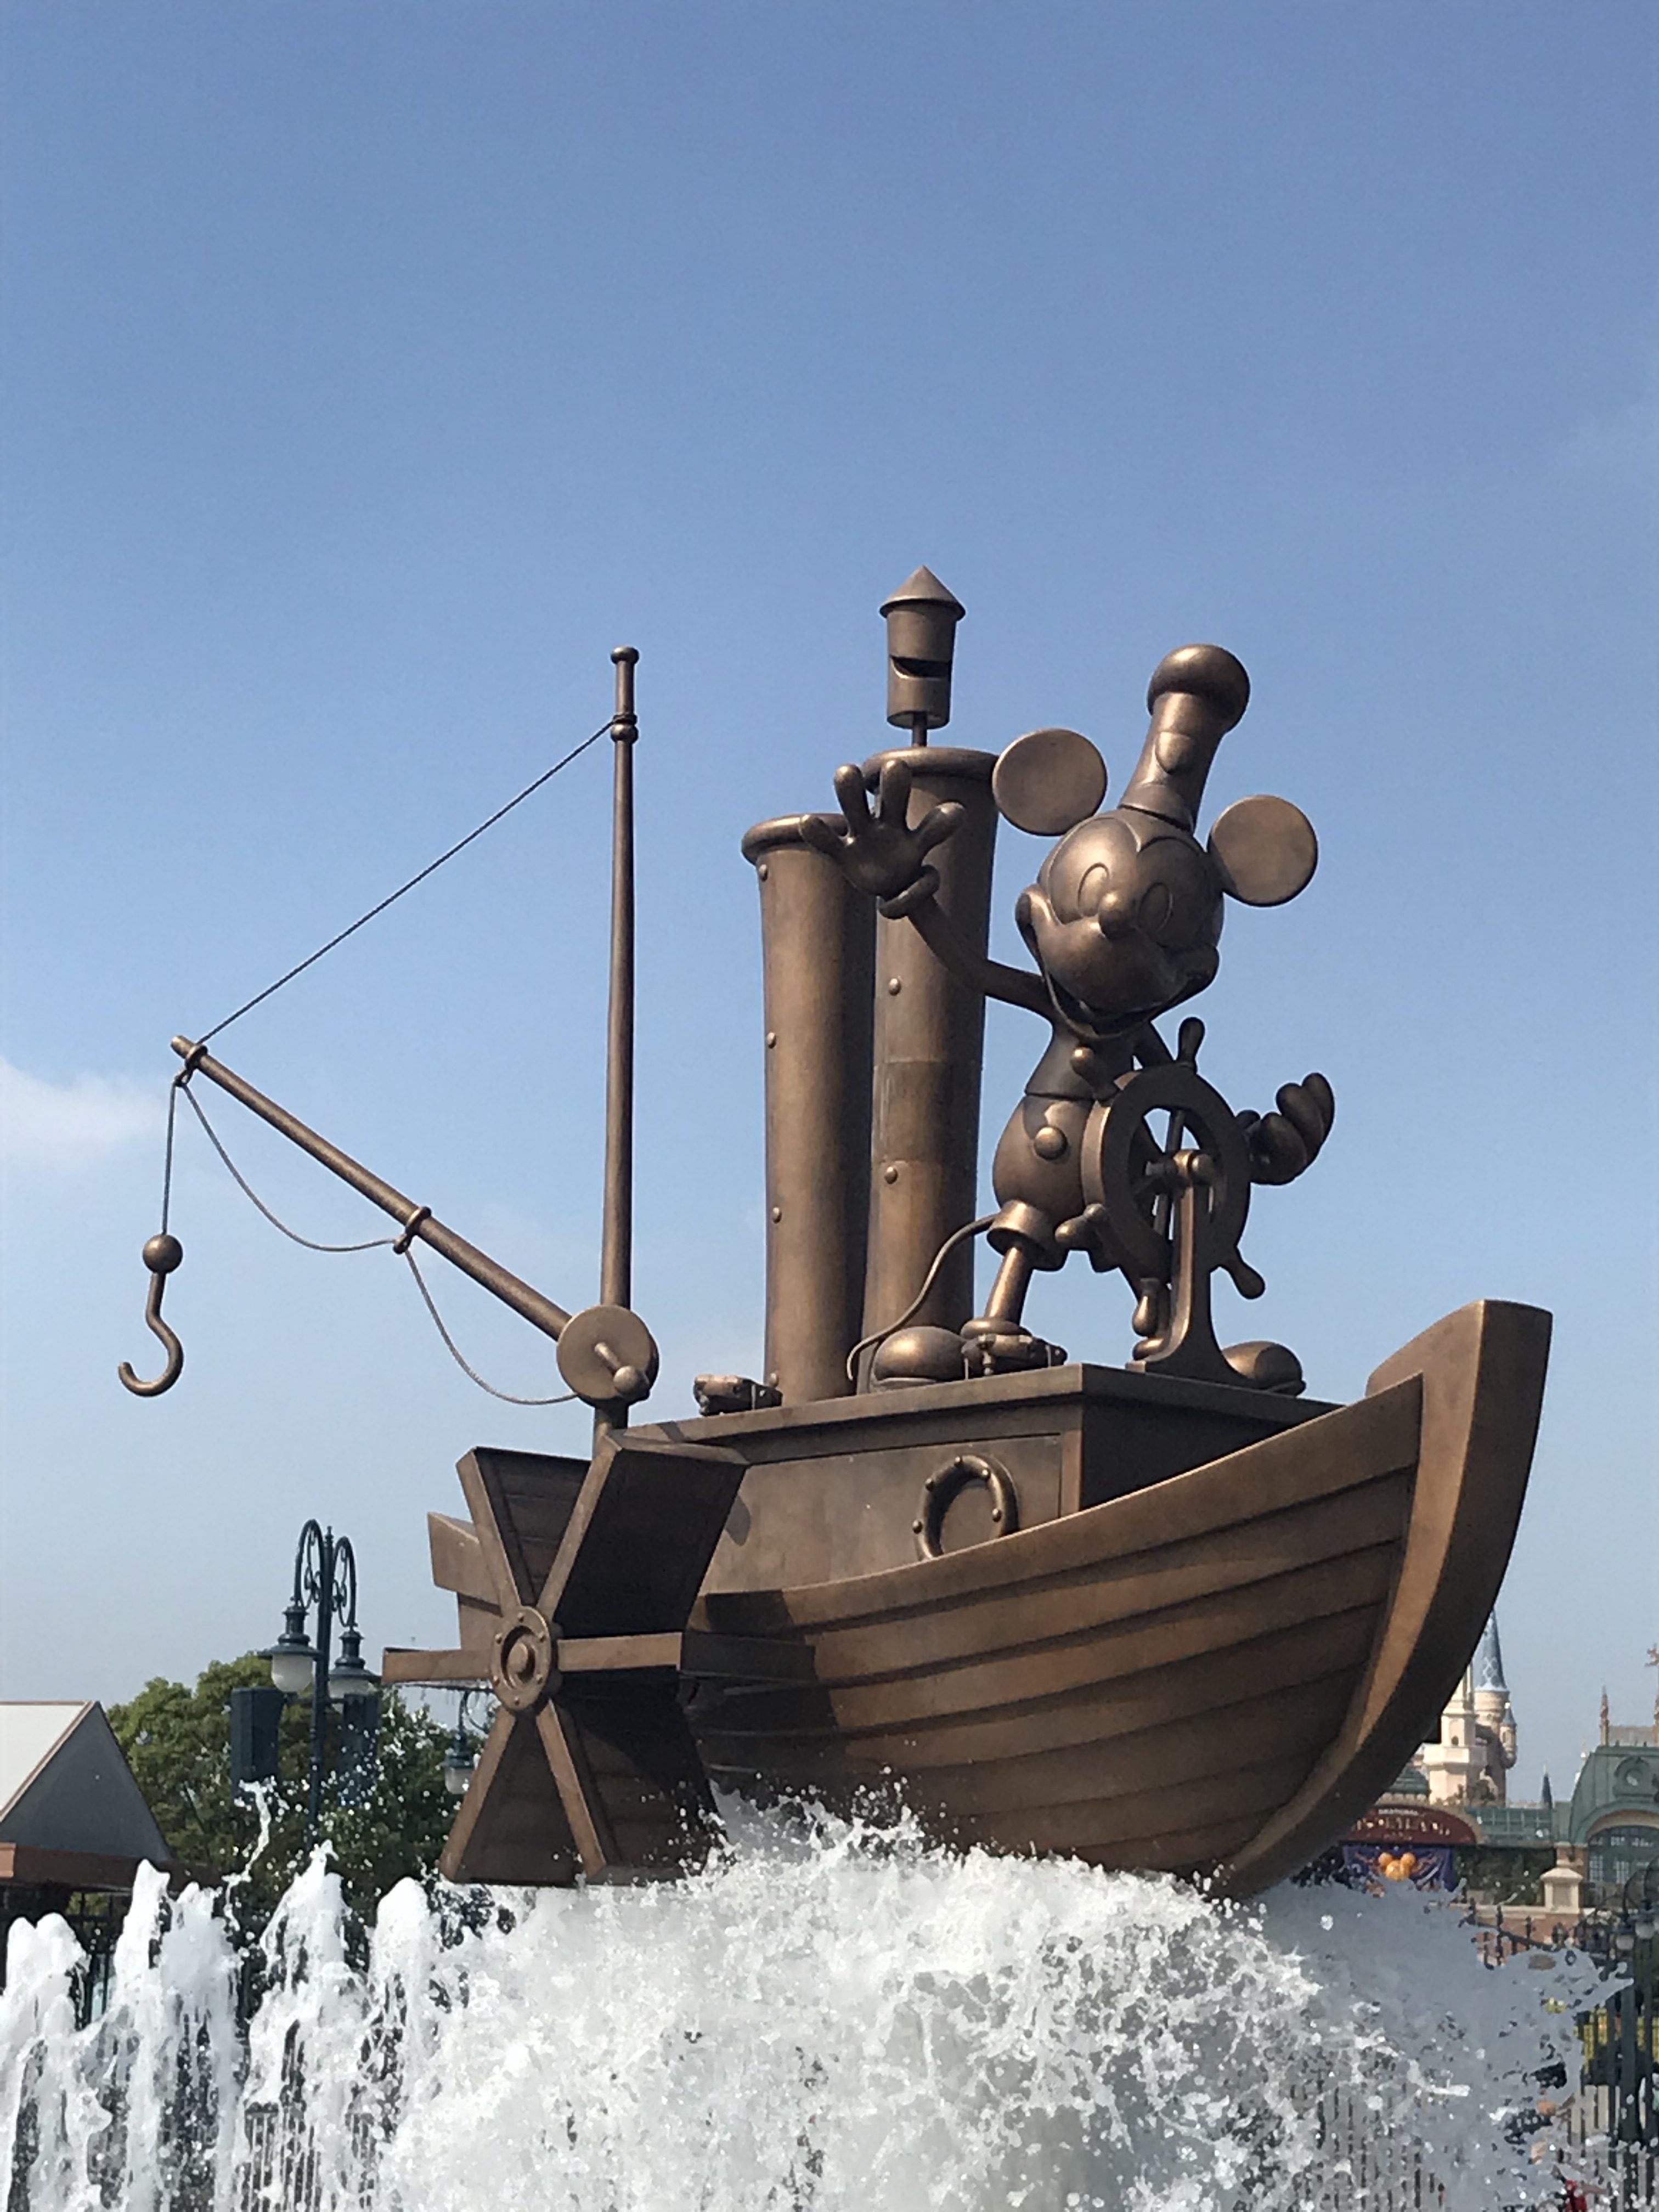 Steamboat Willie Micky Maus